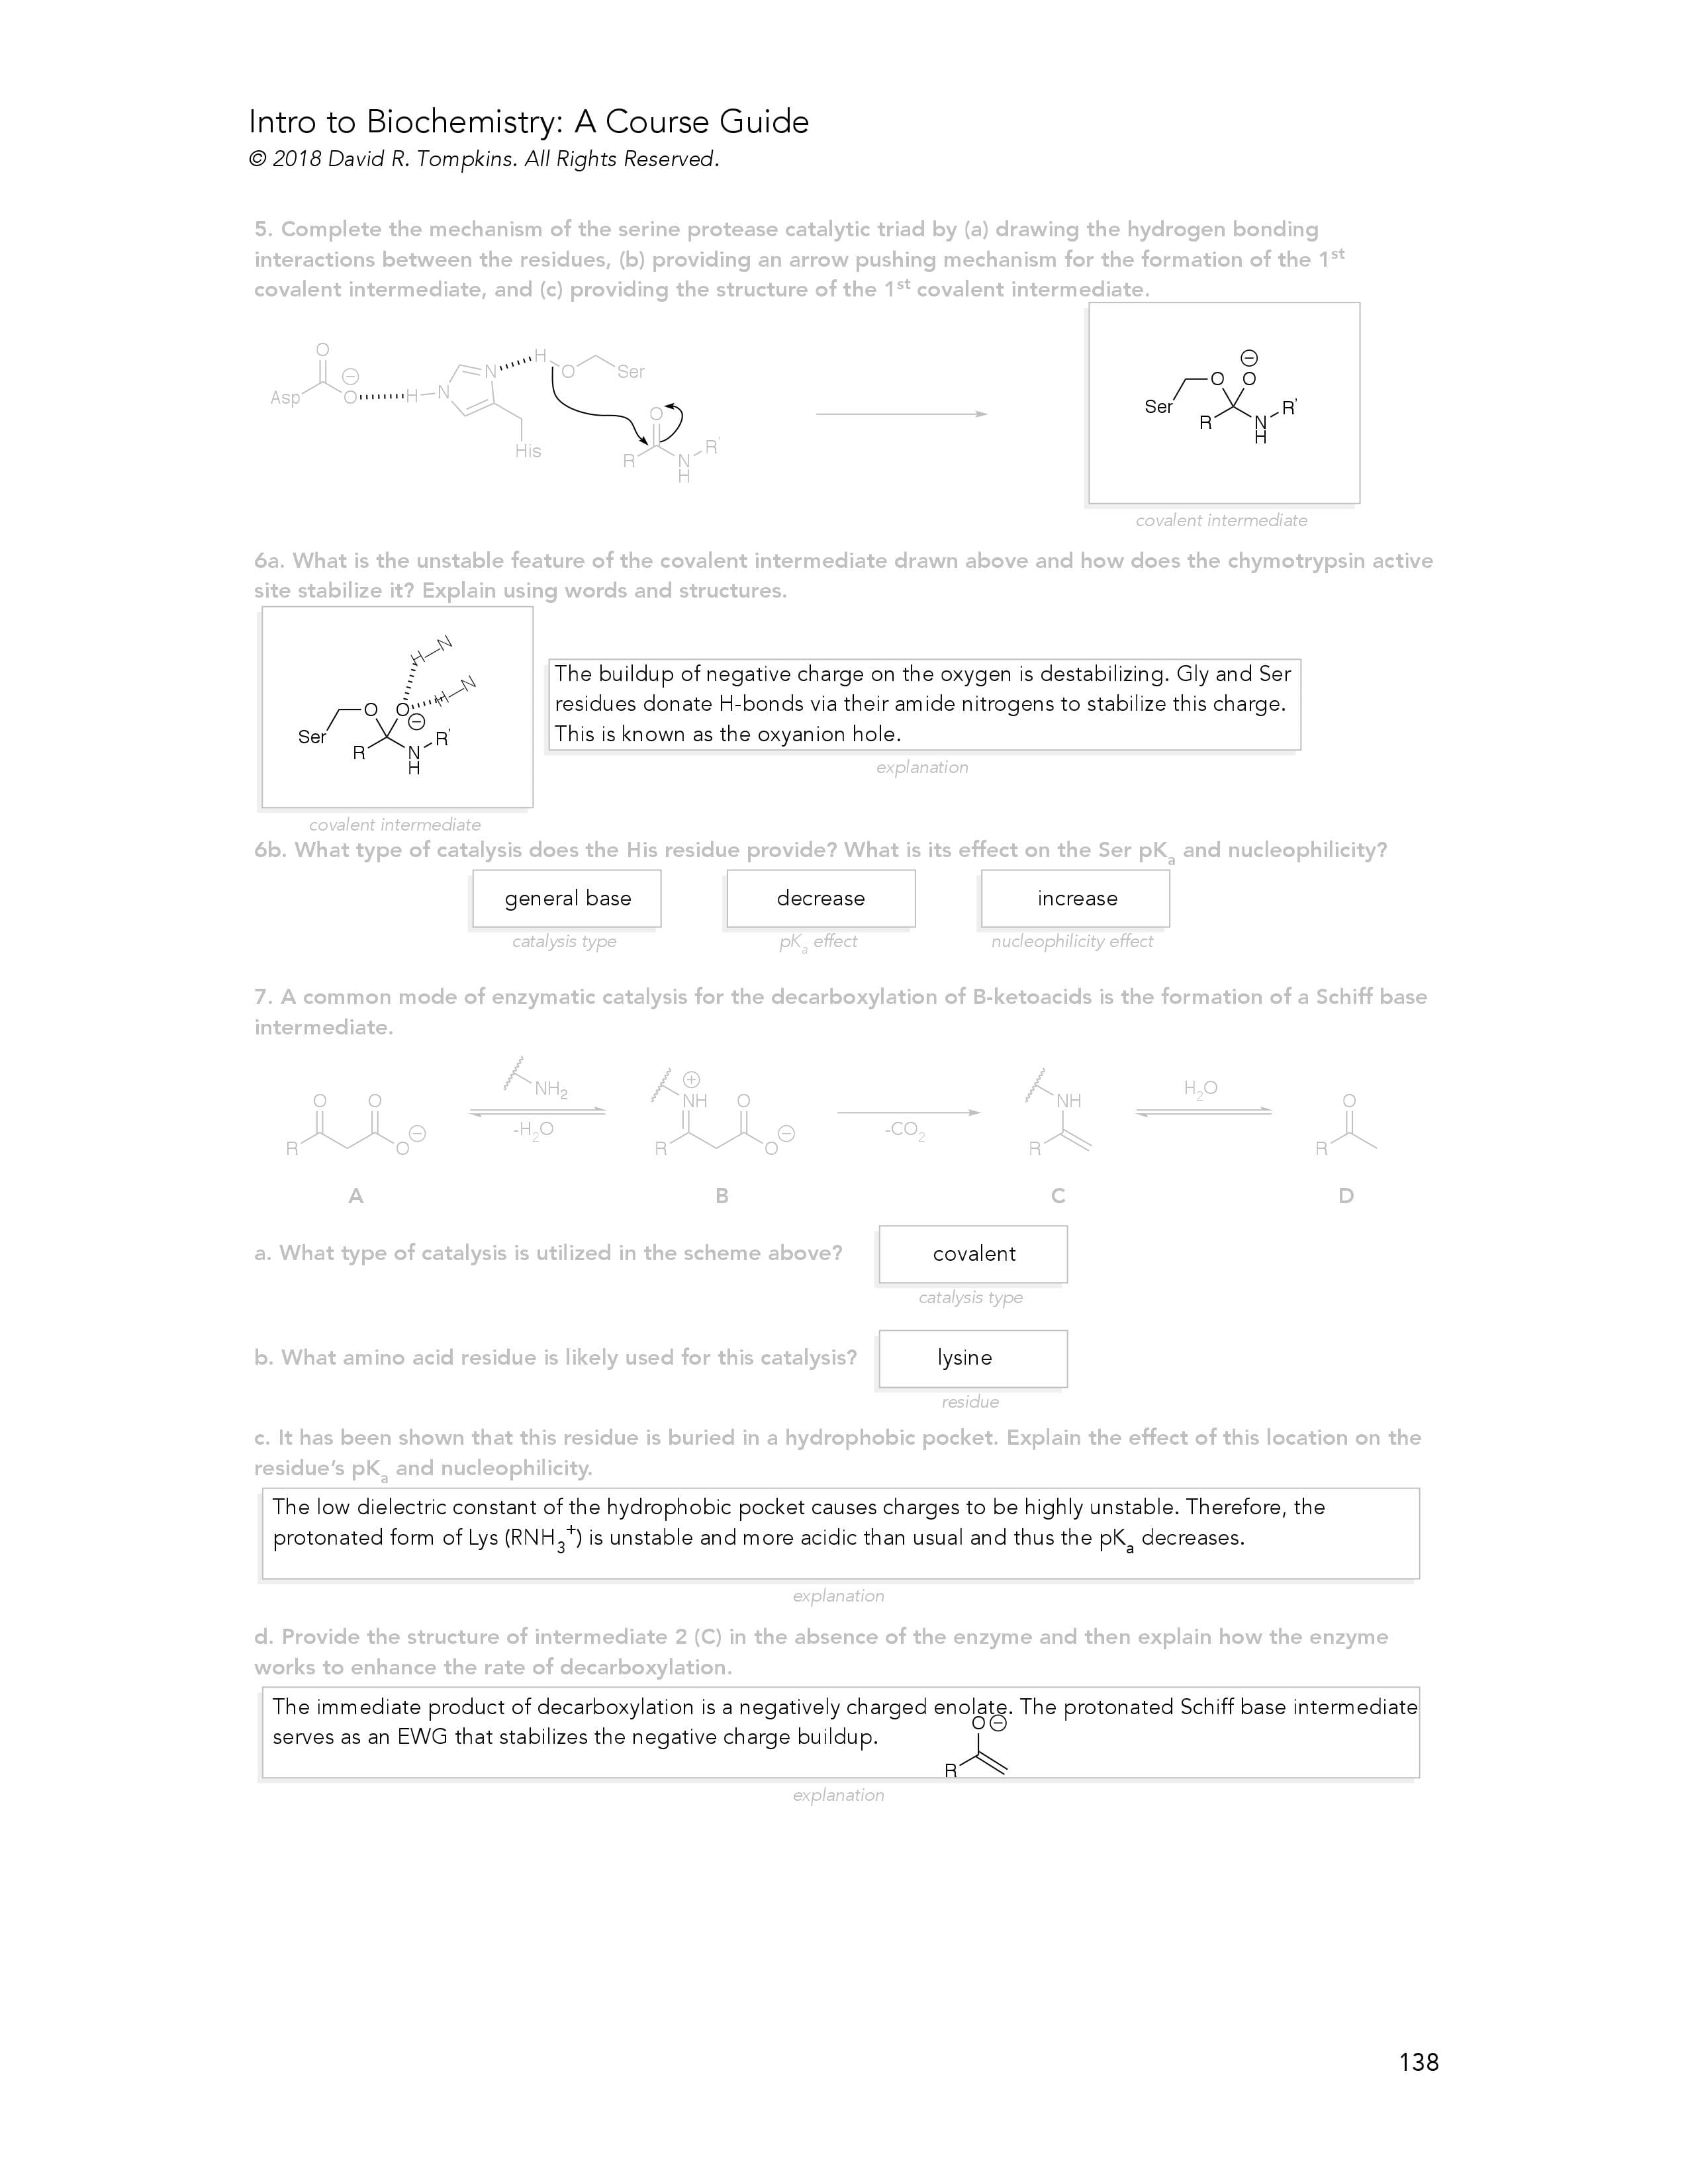 Introduction to Biochemistry Course Guide Example Page 6